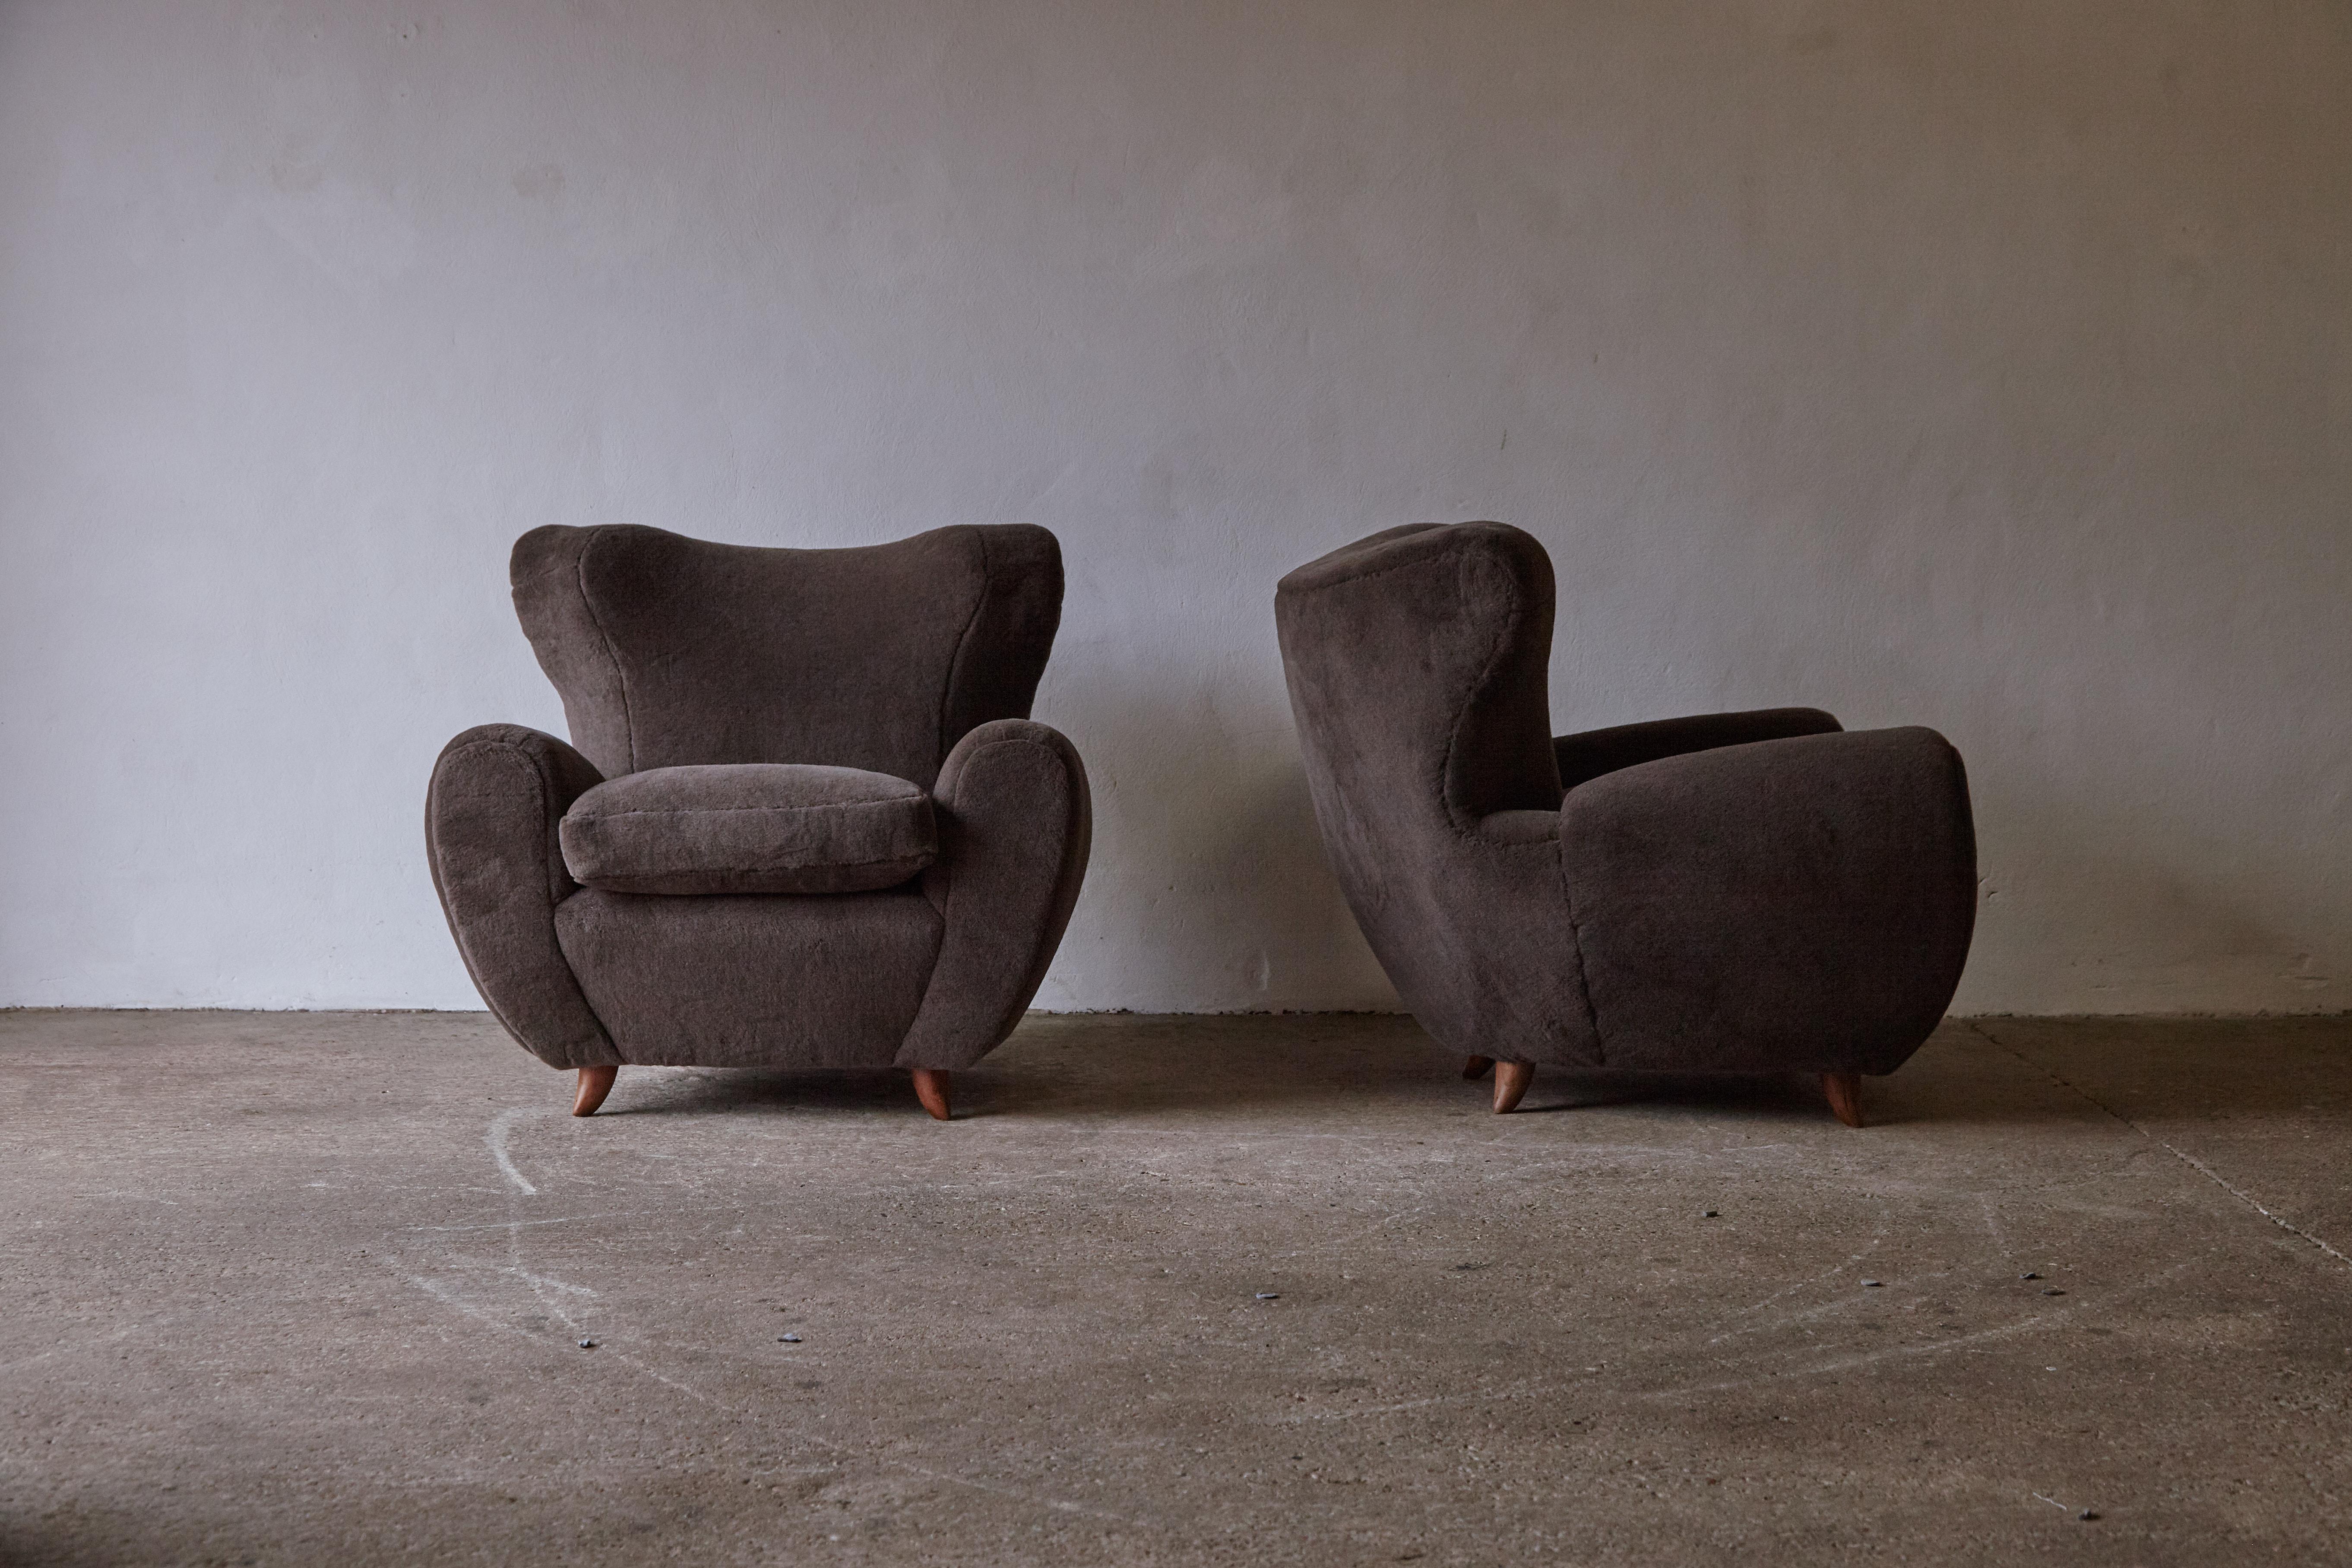 Exceptional Lounge Chairs, Upholstered in Alpaca, Italy, 1950s For Sale 9